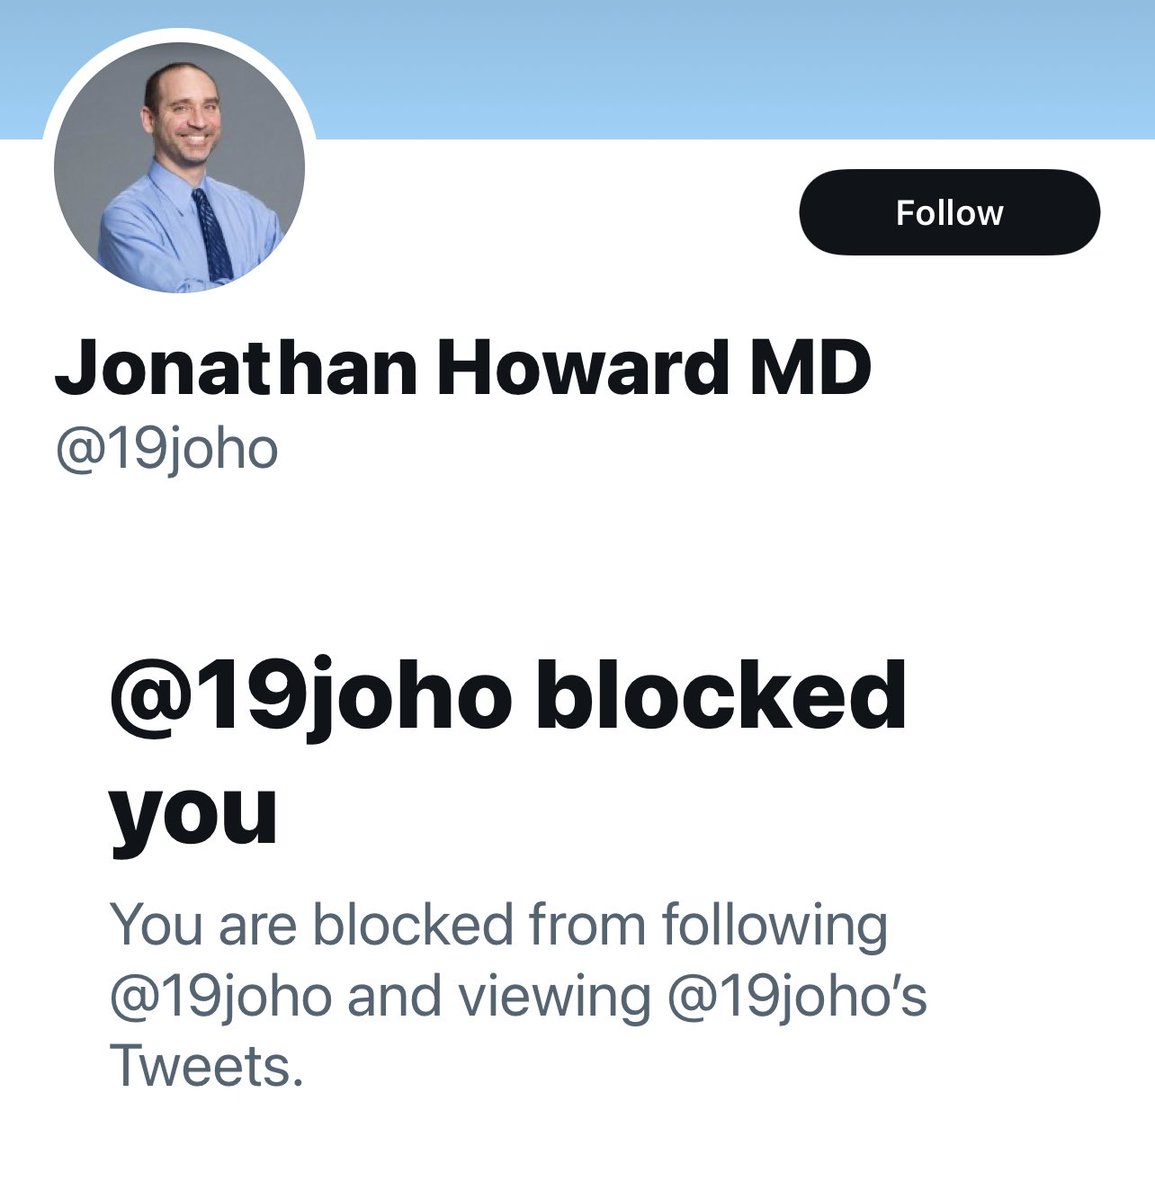 Oh NoHo! 

JoHo blocked me when I asked for evidence of his “millions of lives saved by the vaccines” claim